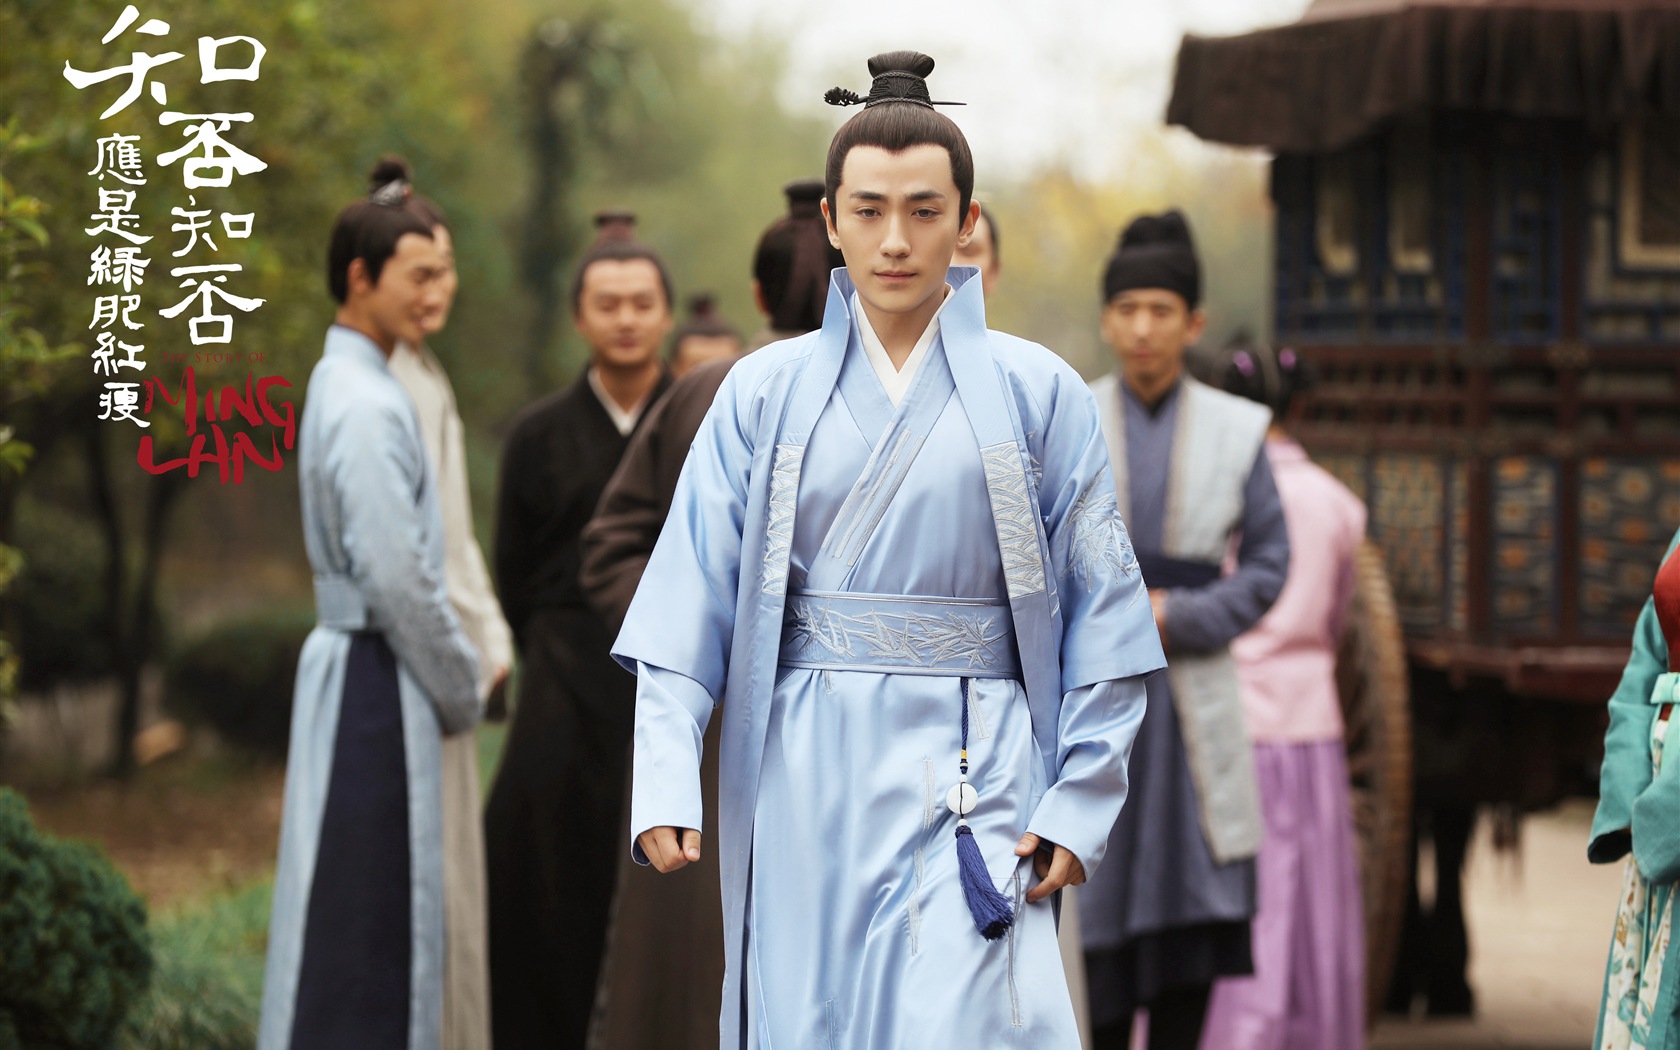 The Story Of MingLan, TV series HD wallpapers #54 - 1680x1050